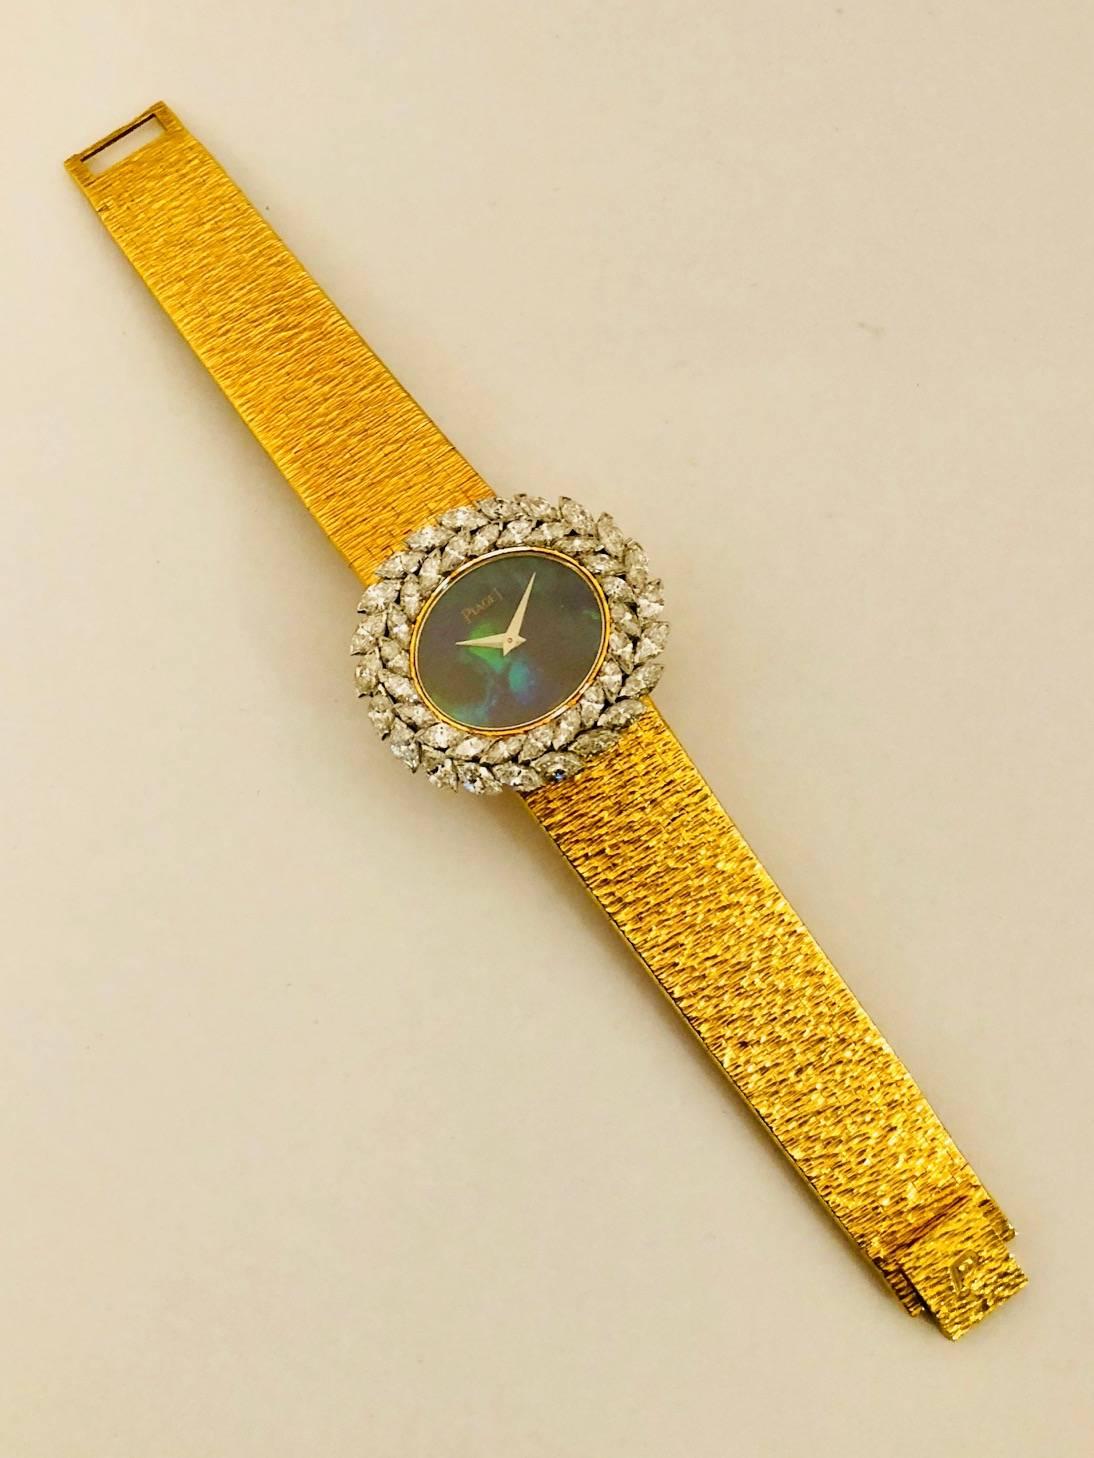 Since 1874, Piaget has designed, developed and produced world class timepieces.  This 18 karat yellow gold watch features a hypnotic black opal face.  Case measures 32mm x 29mm.  A laurel wreath of marquise white diamonds, set in 18 karat white